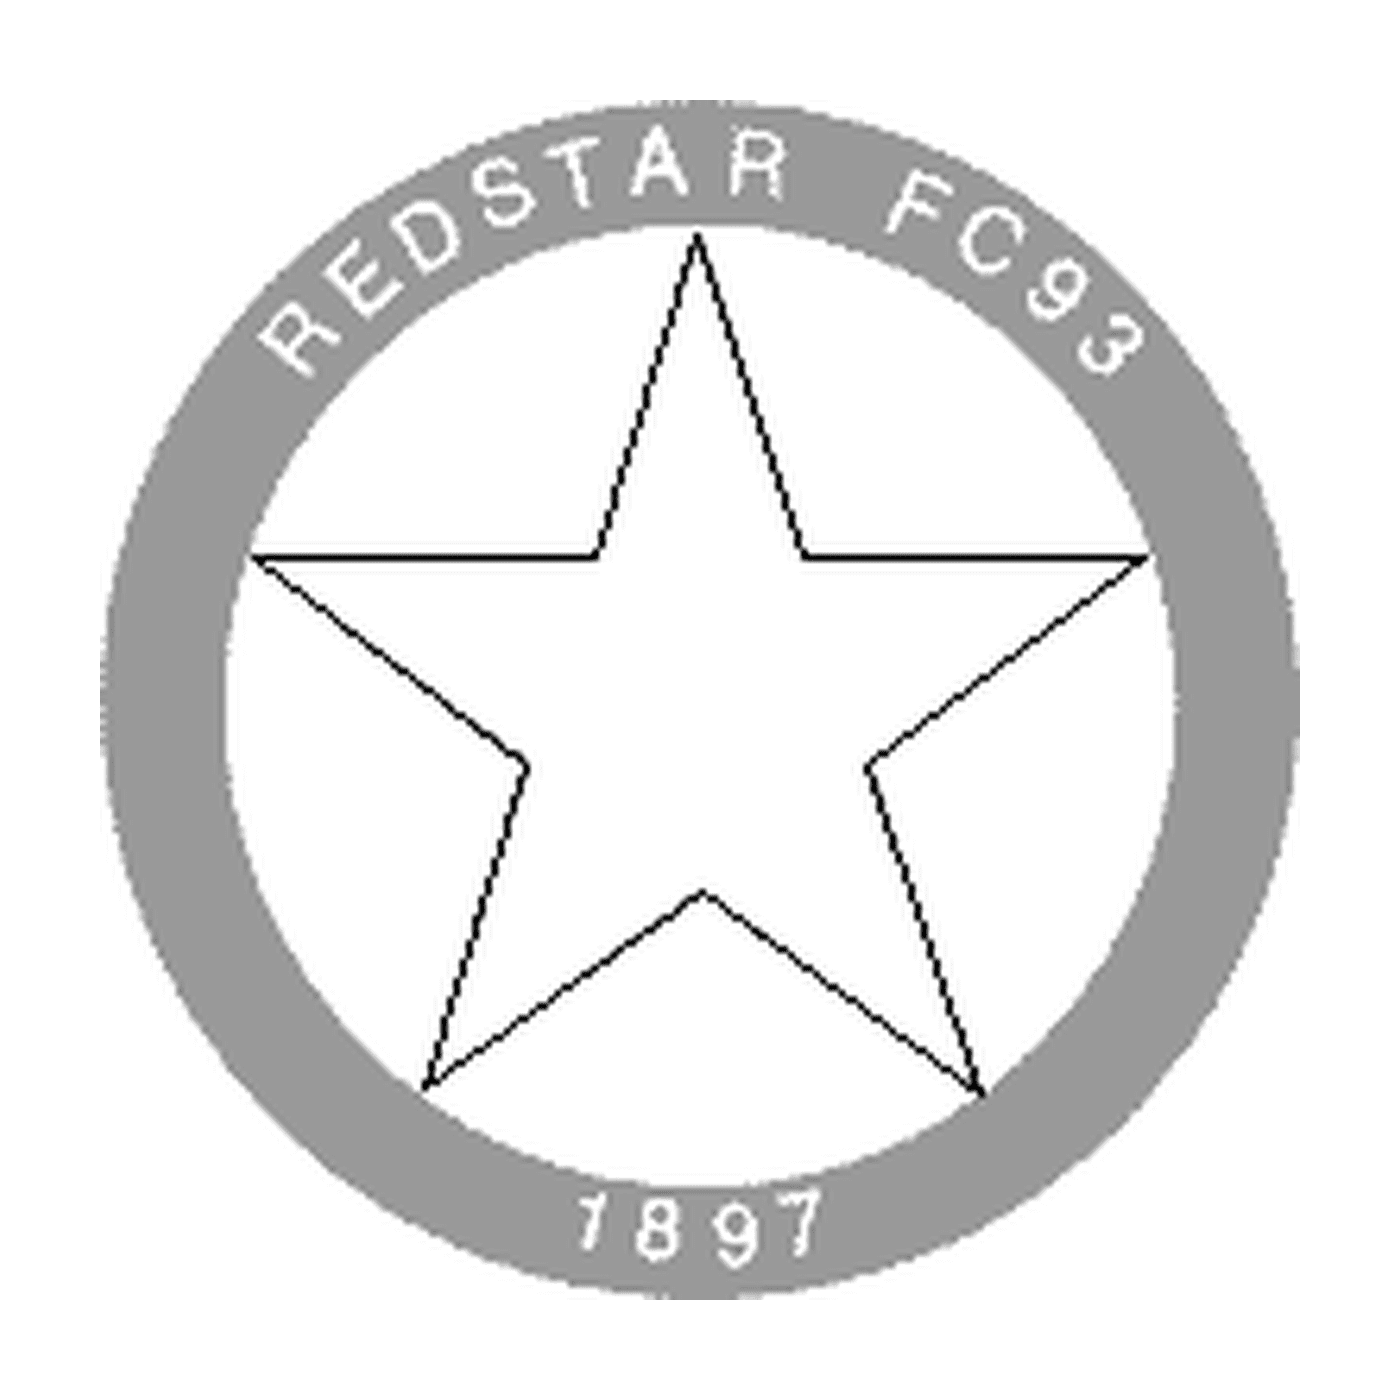  Logo of the Red Star FC93 